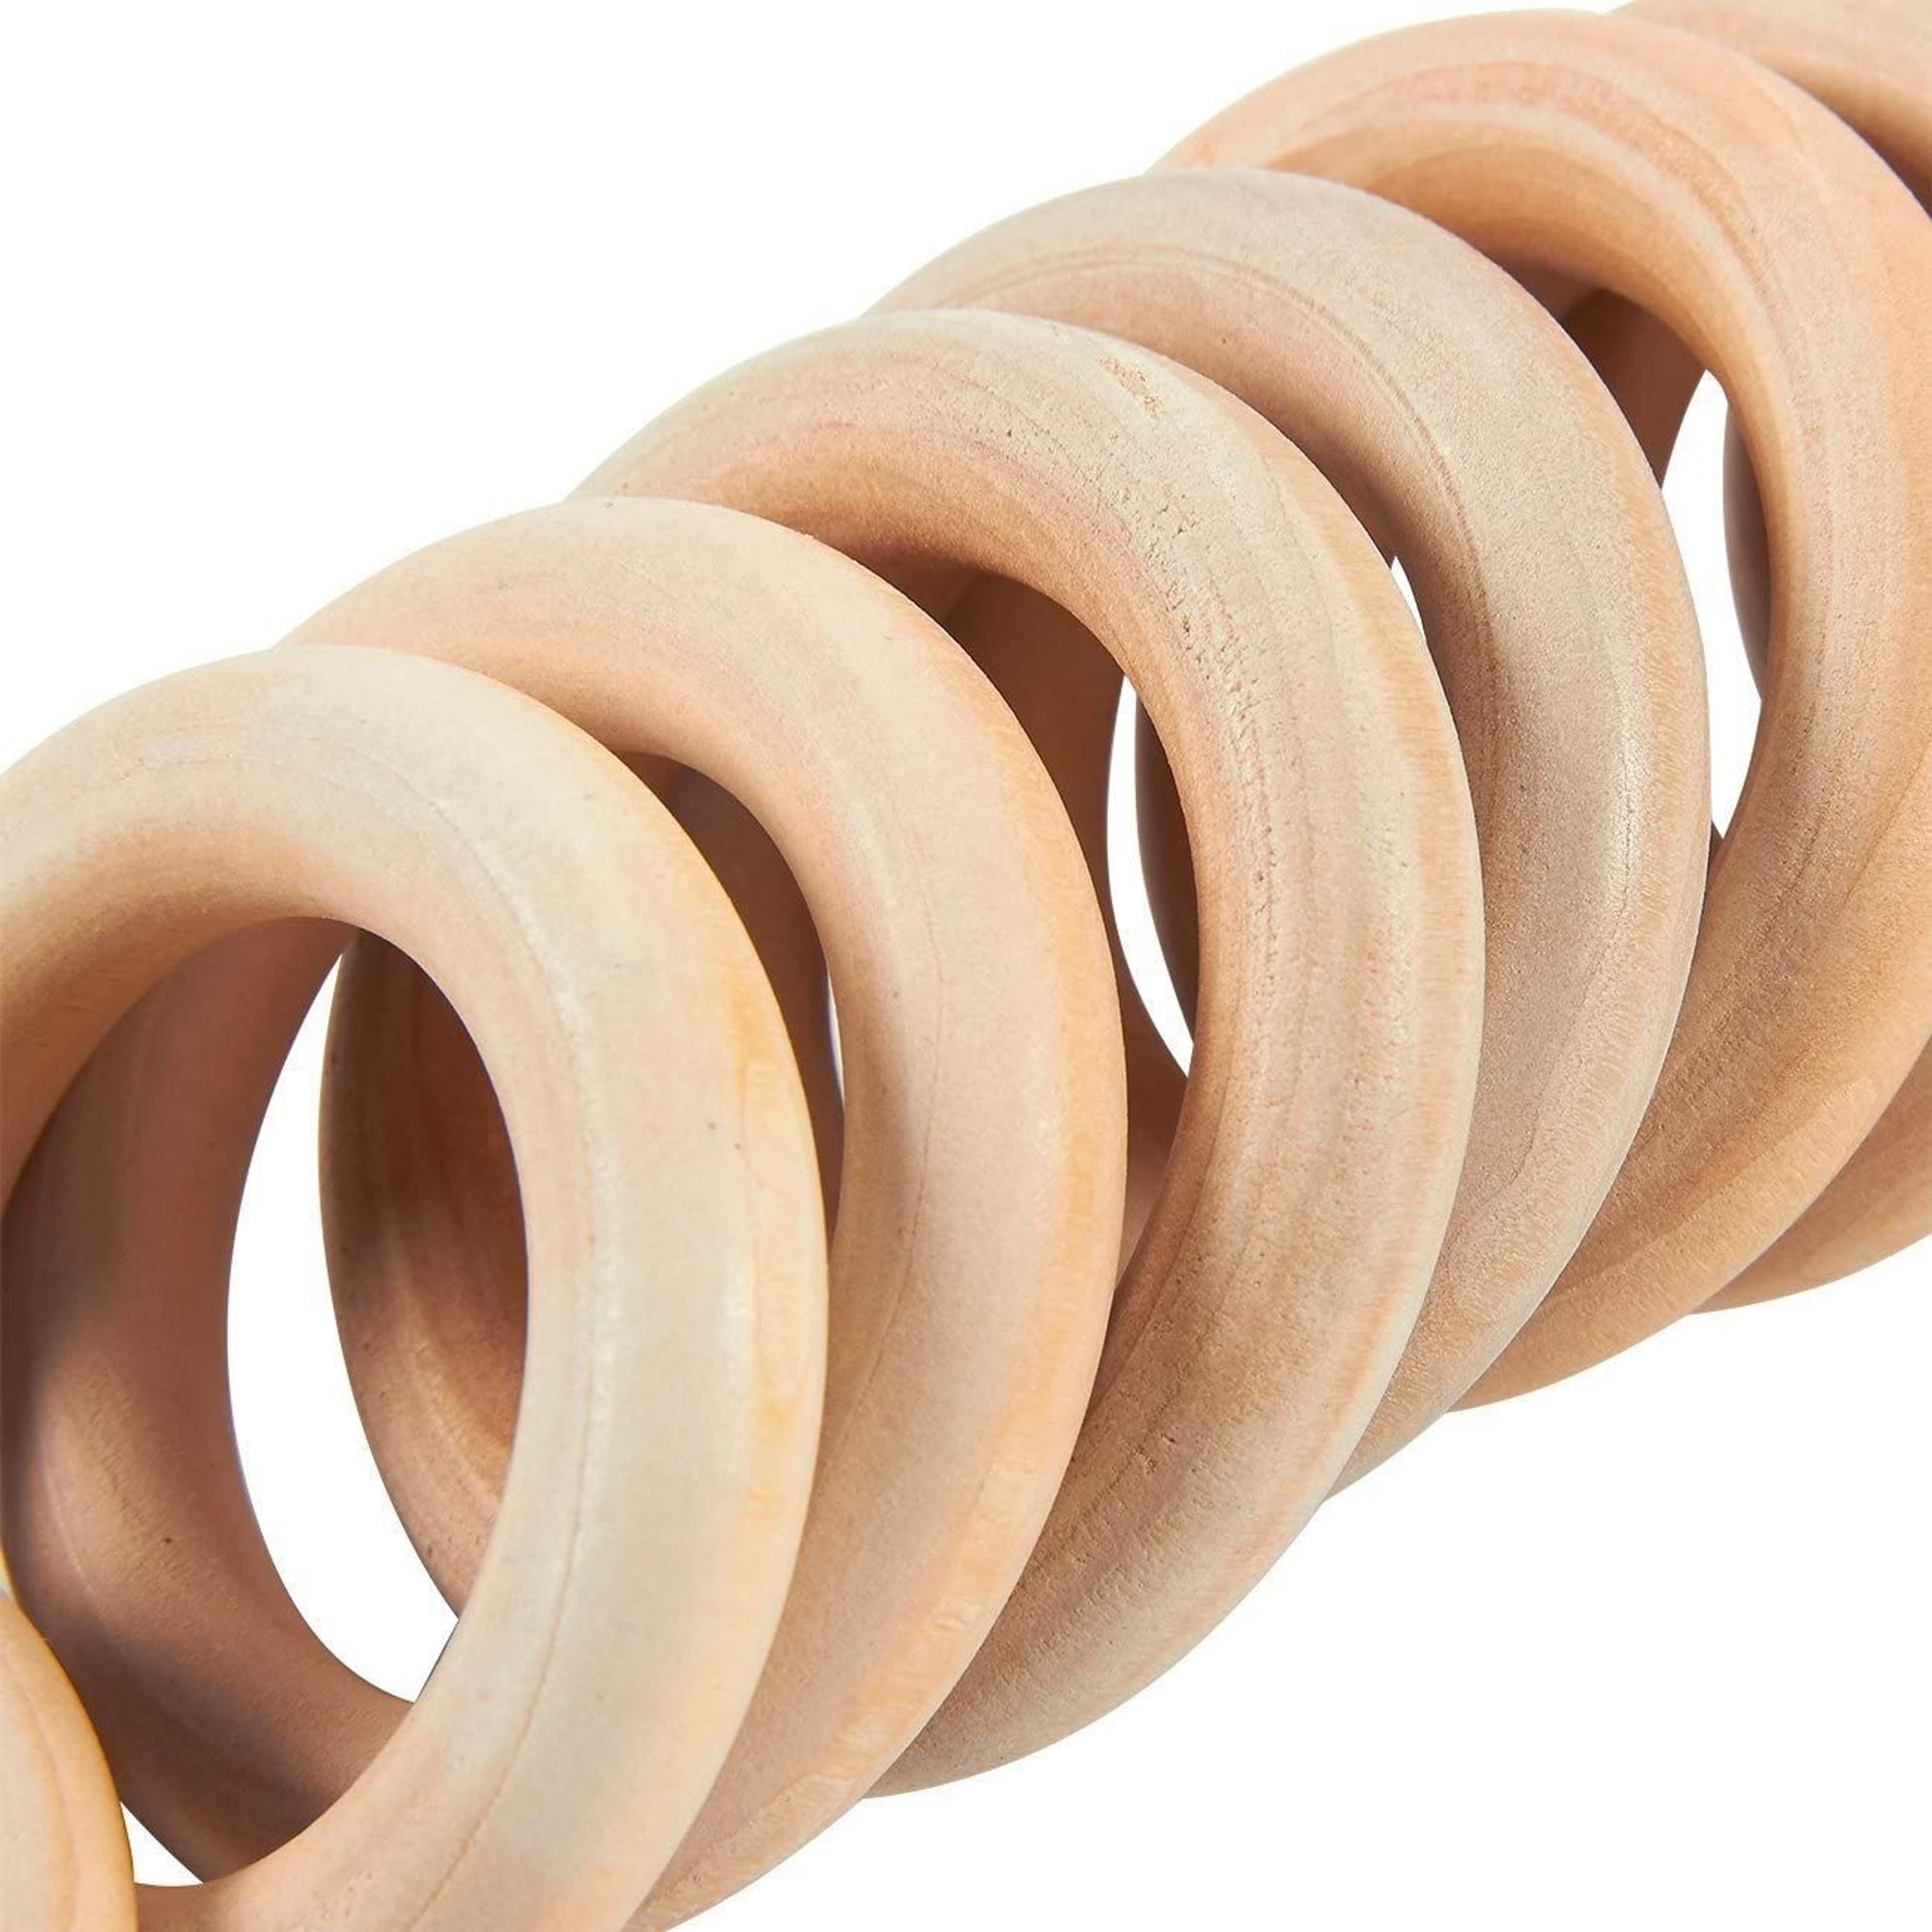 20 Pack Unfinished Natural Wood Rings for Crafts, Macrame Projects, Jewelry  Making, DIY Pendant Connectors (2.1 In) 